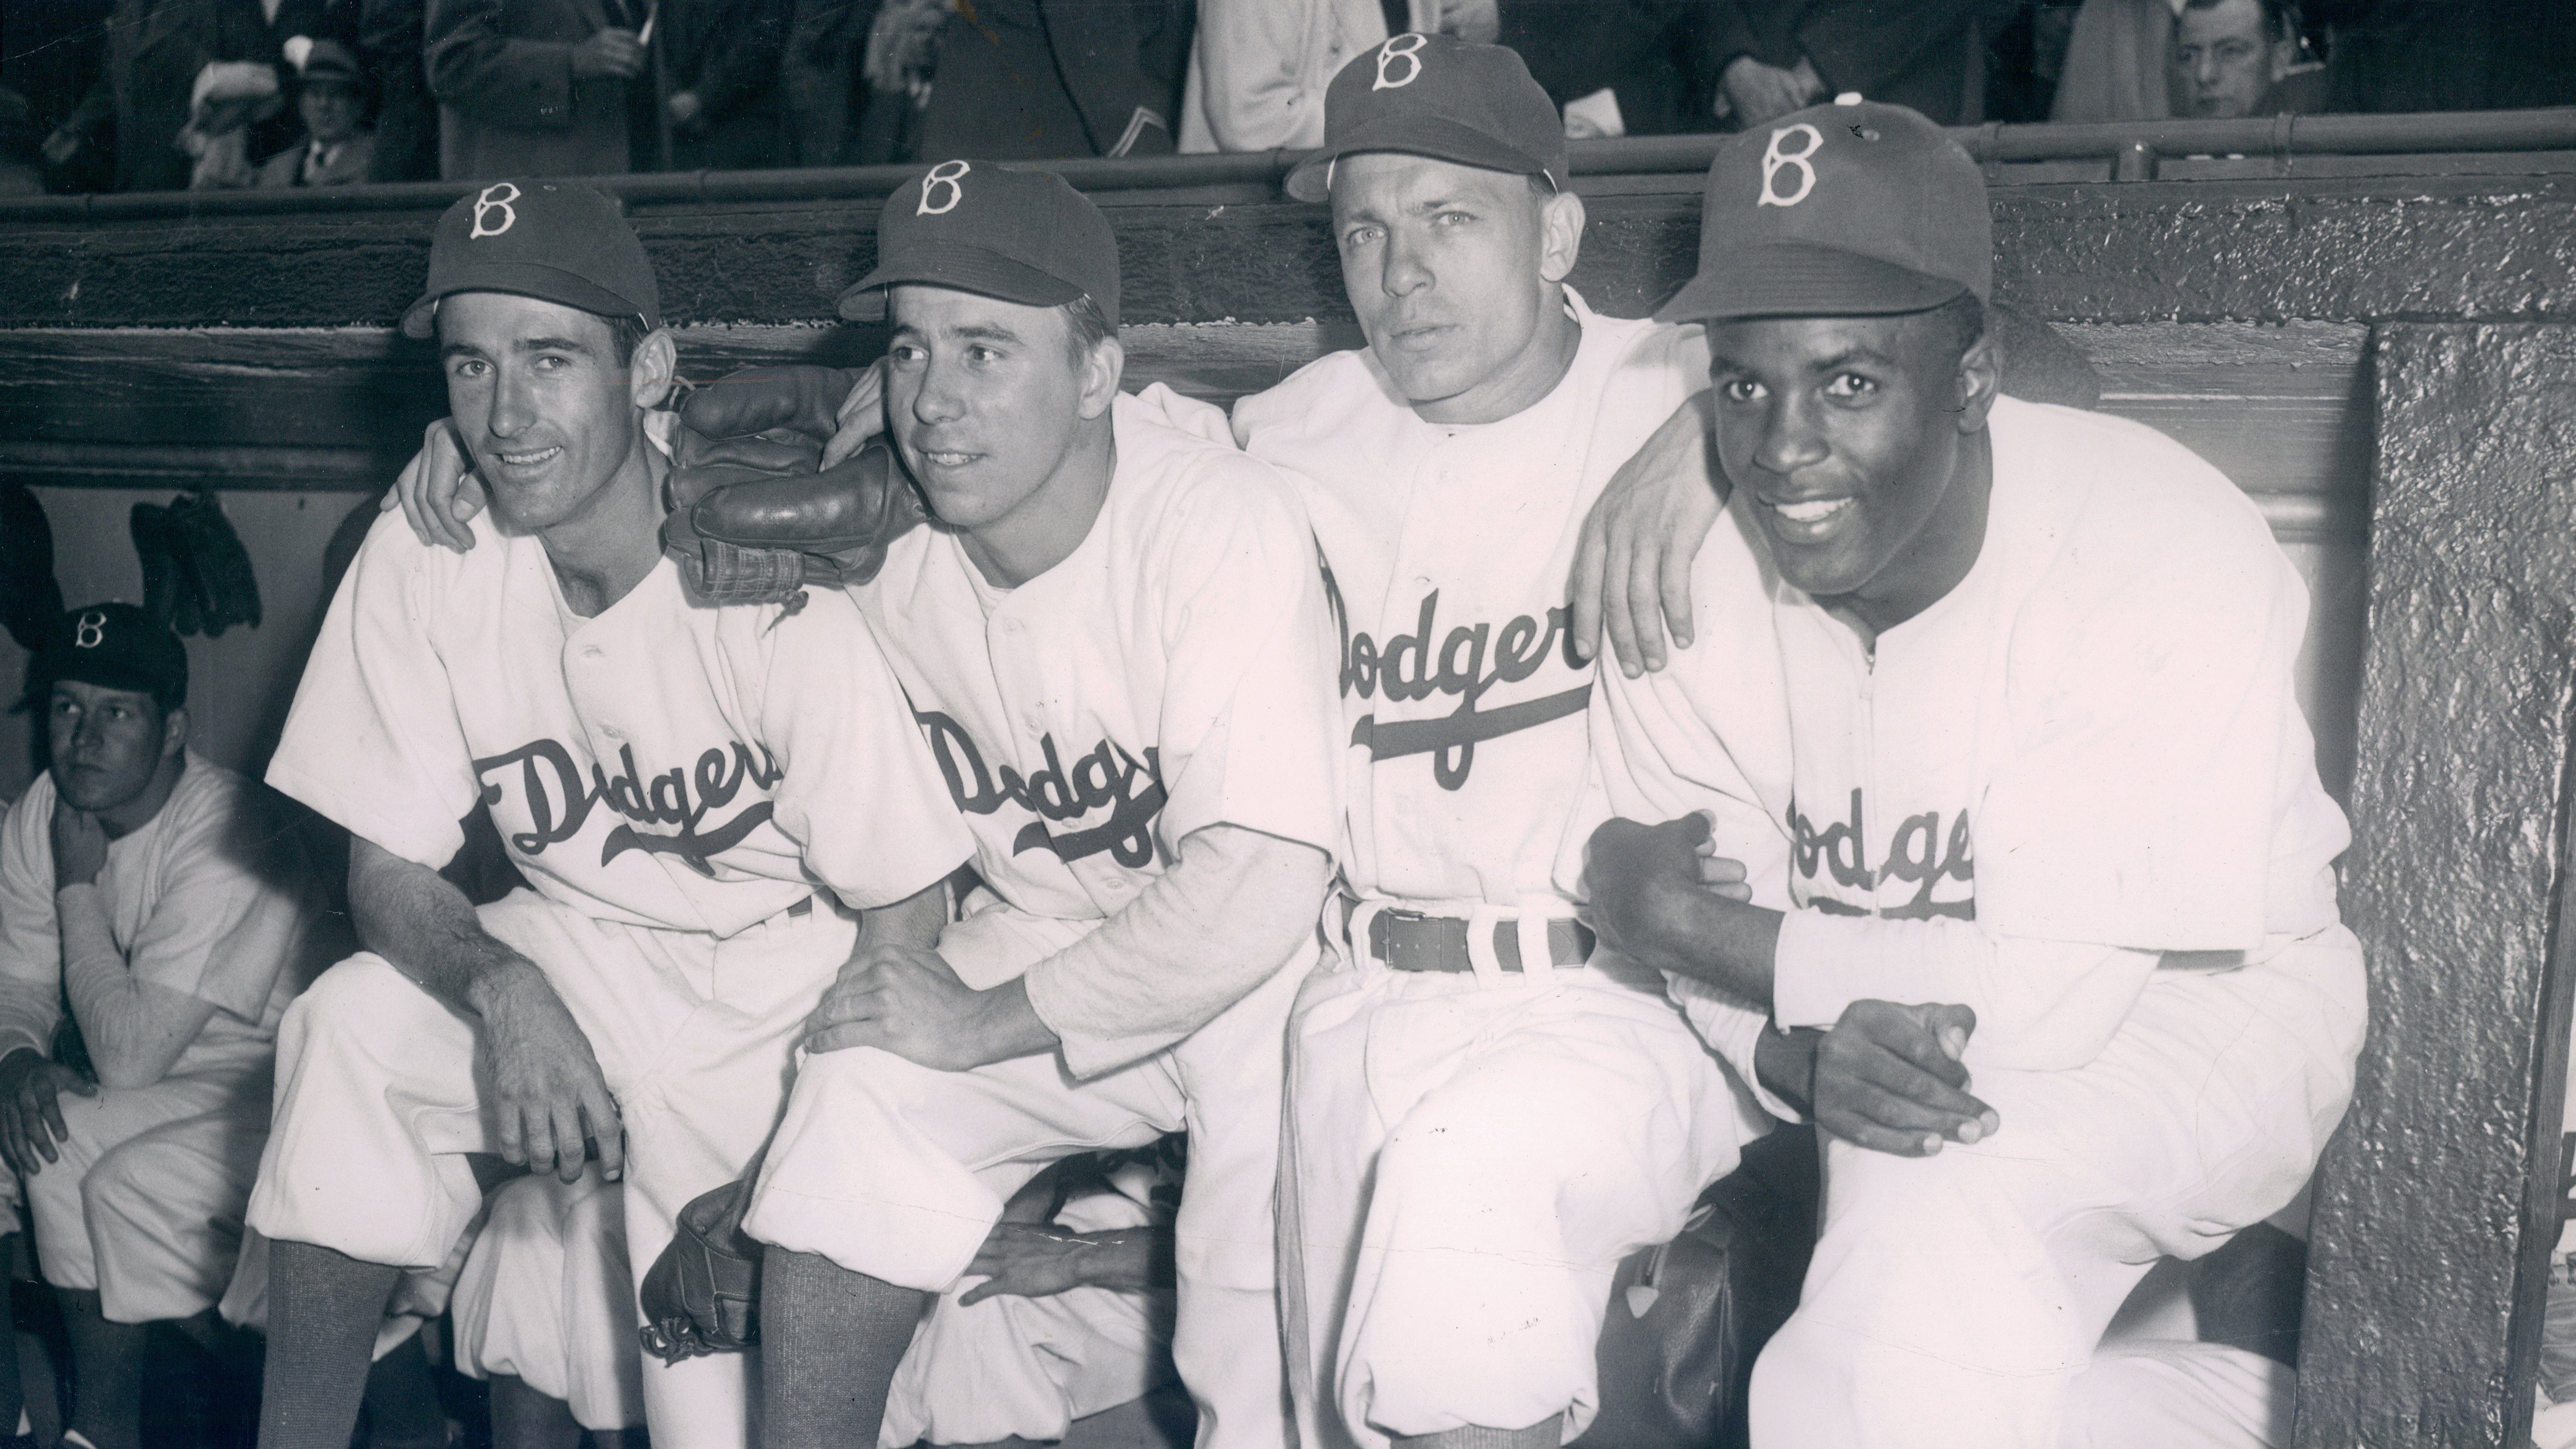 Jackie Robinson Bat Sells For Record Price at Auction – NBC Los